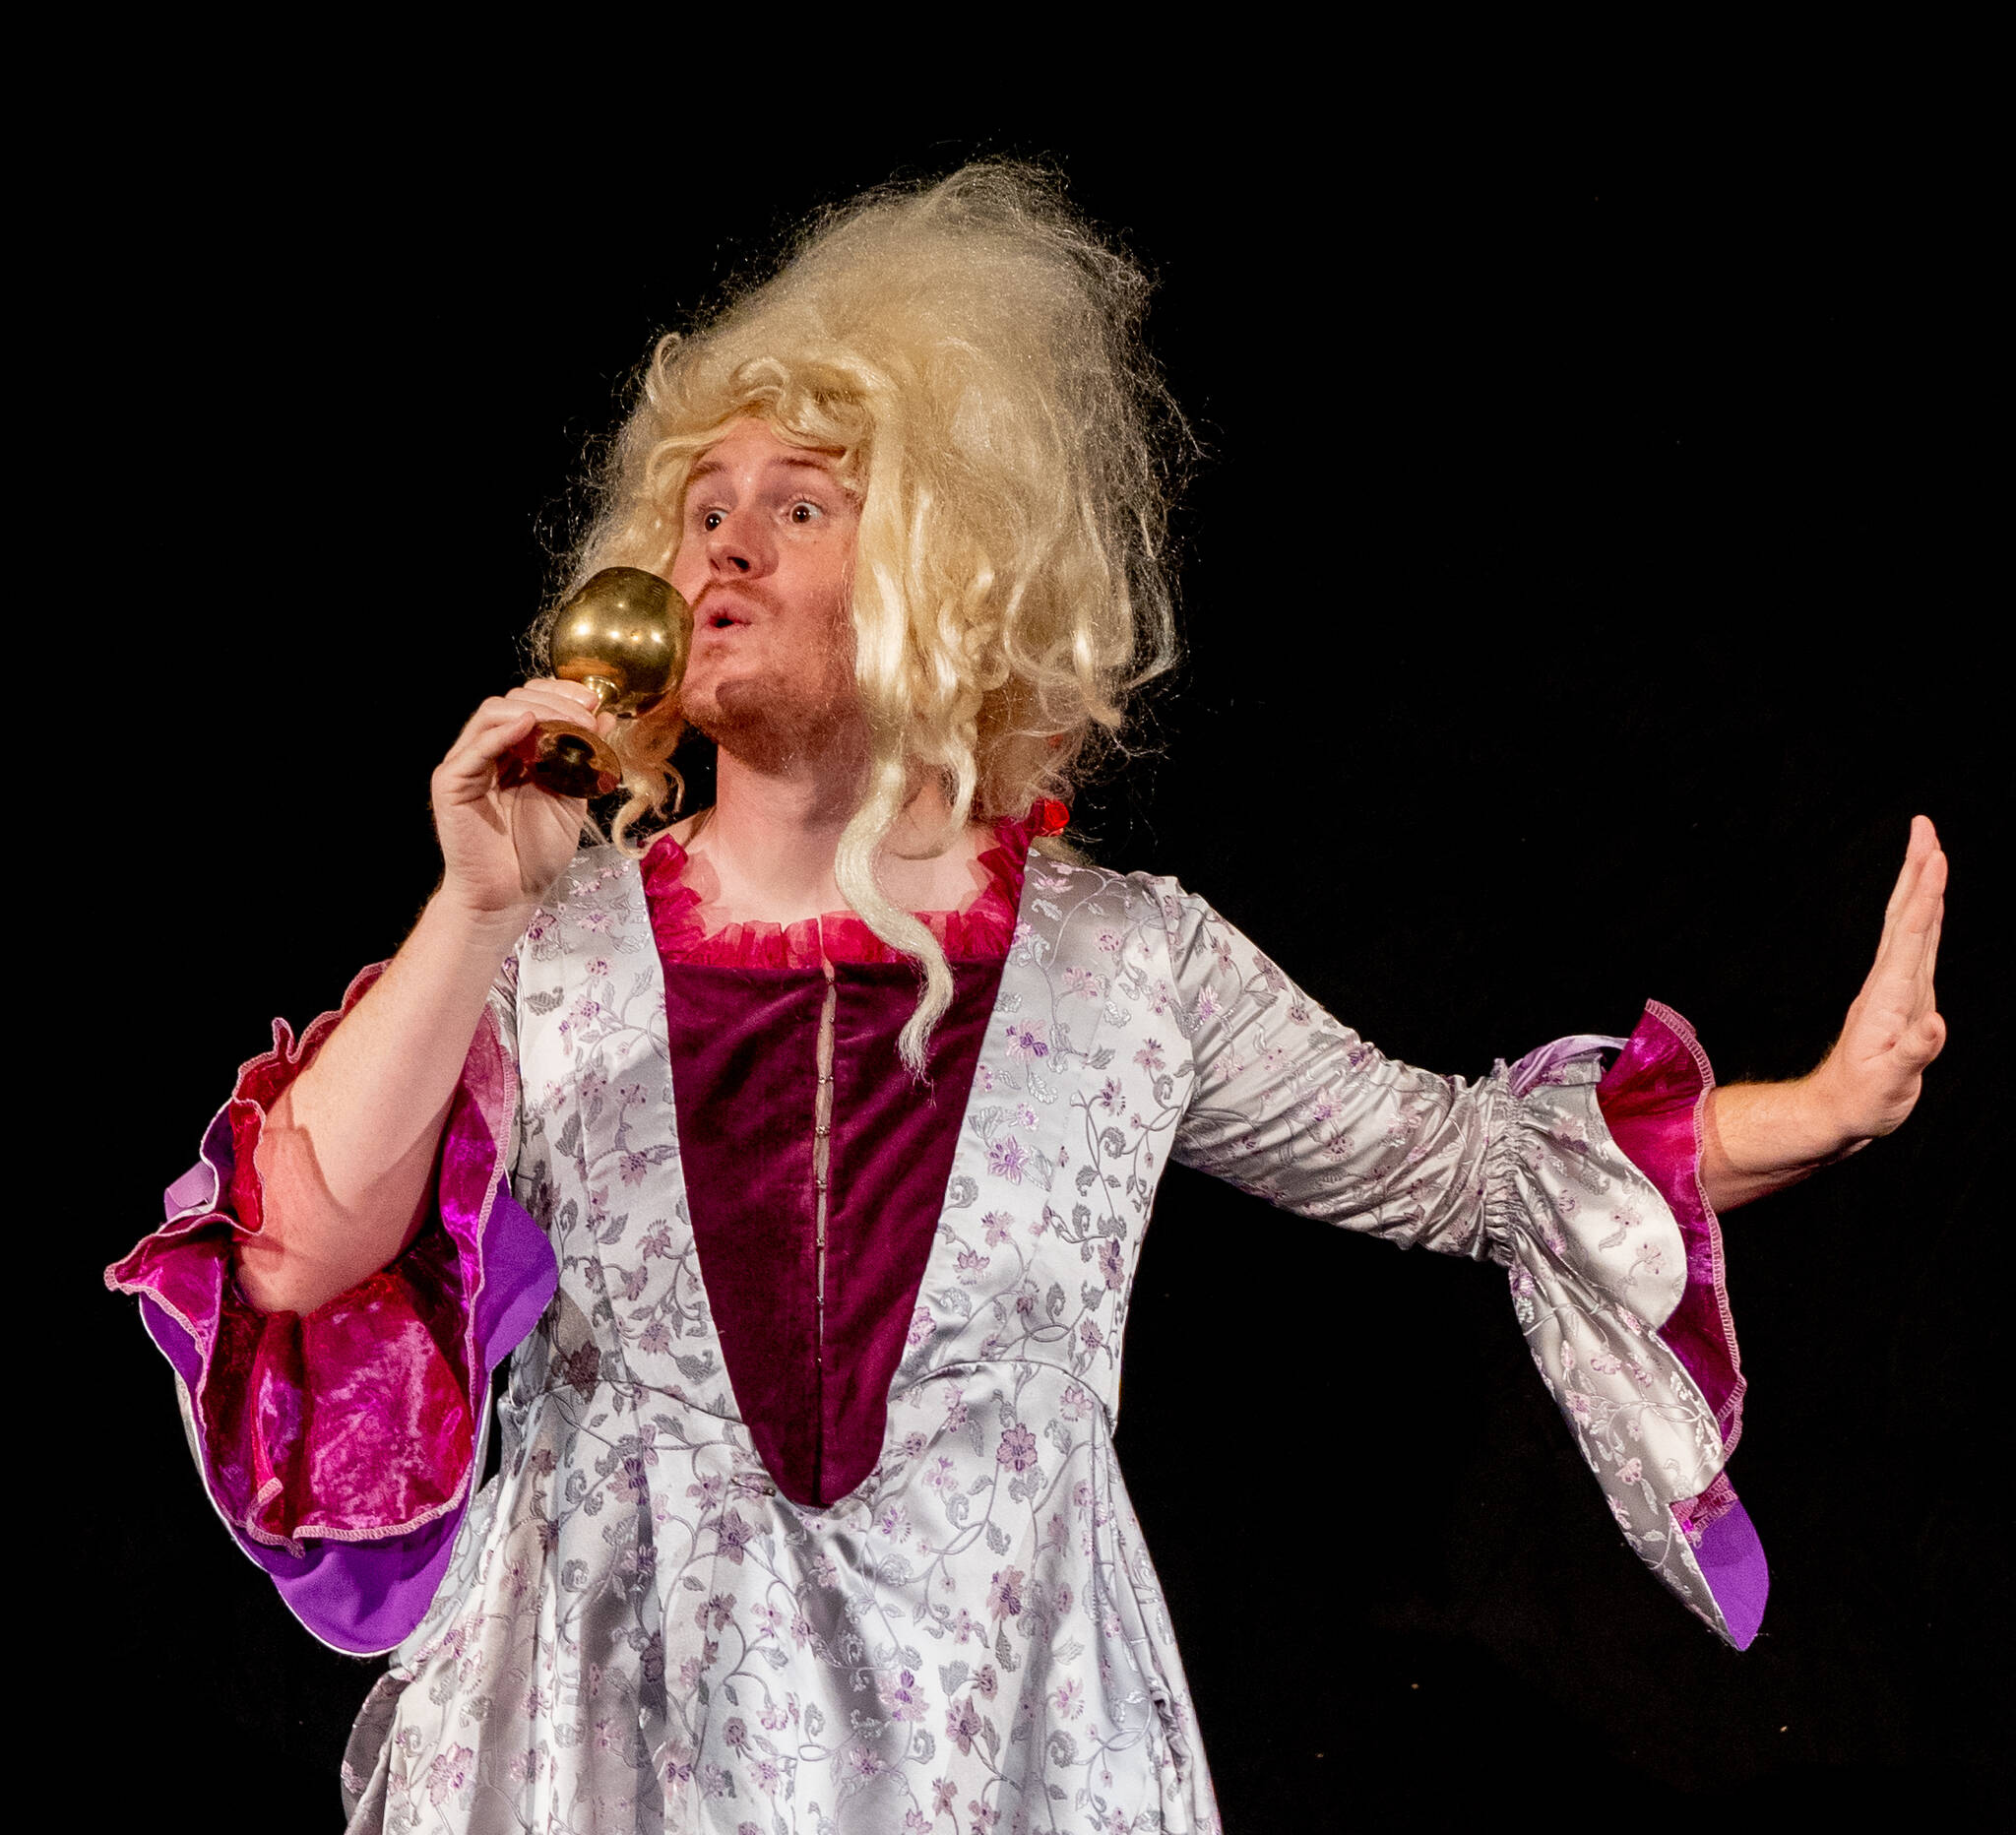 Morgan Bartholick of Port Angeles portrays the Dame in "Goldilocks and the Ultimate Rampage," which has added extra shows this week. Photo courtesy Juan de Fuca Foundation for the Arts